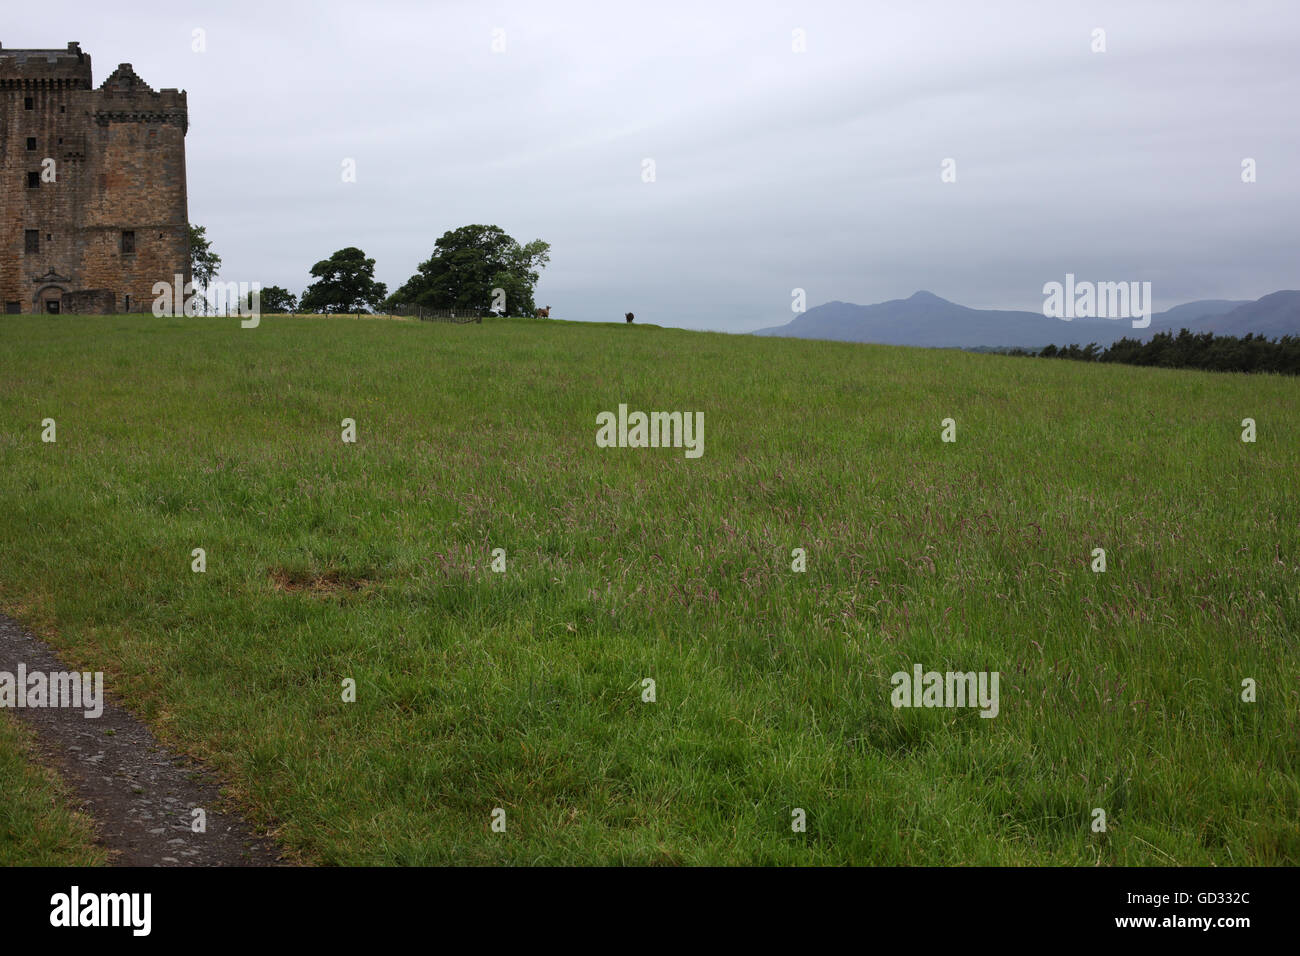 Clackmannan tower - King's seat hill - Stirlingshire - Scotland - UK Stock Photo